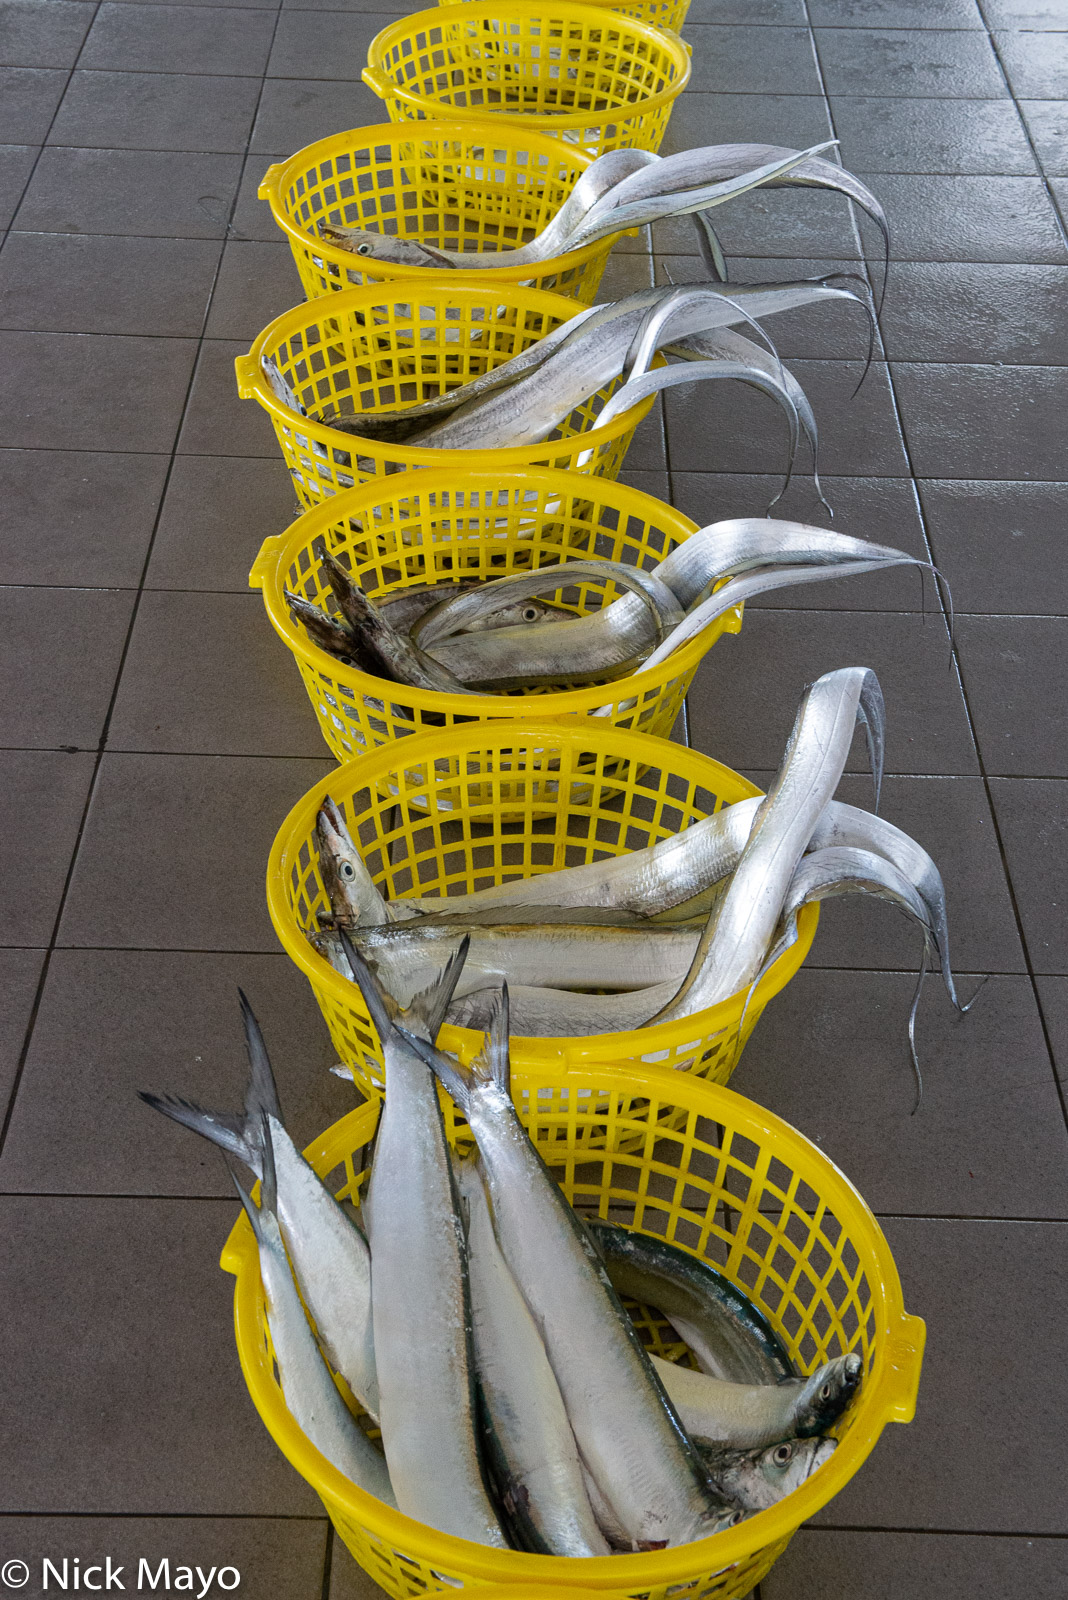 Part of the day's fish catch waiting to be auctioned at Chingkunshen port.